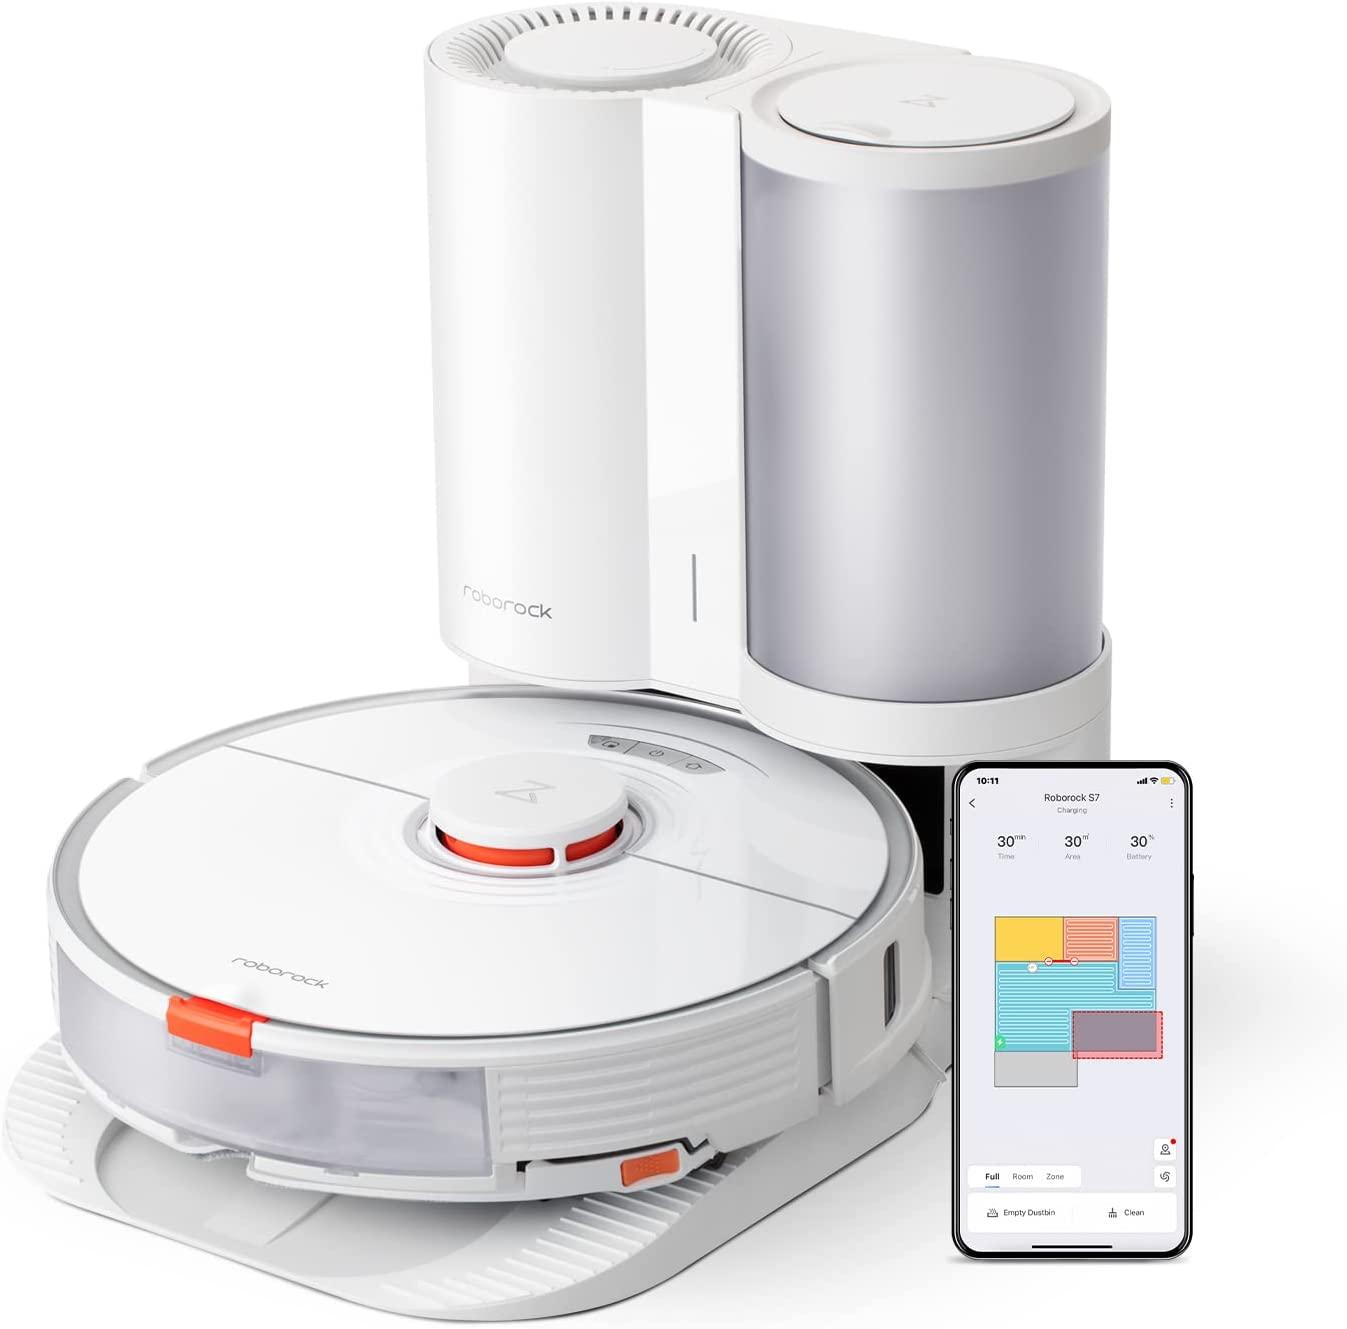 Roborock S7+ Robotic Vacuum and Sonic Mop for $679.48 Shipped